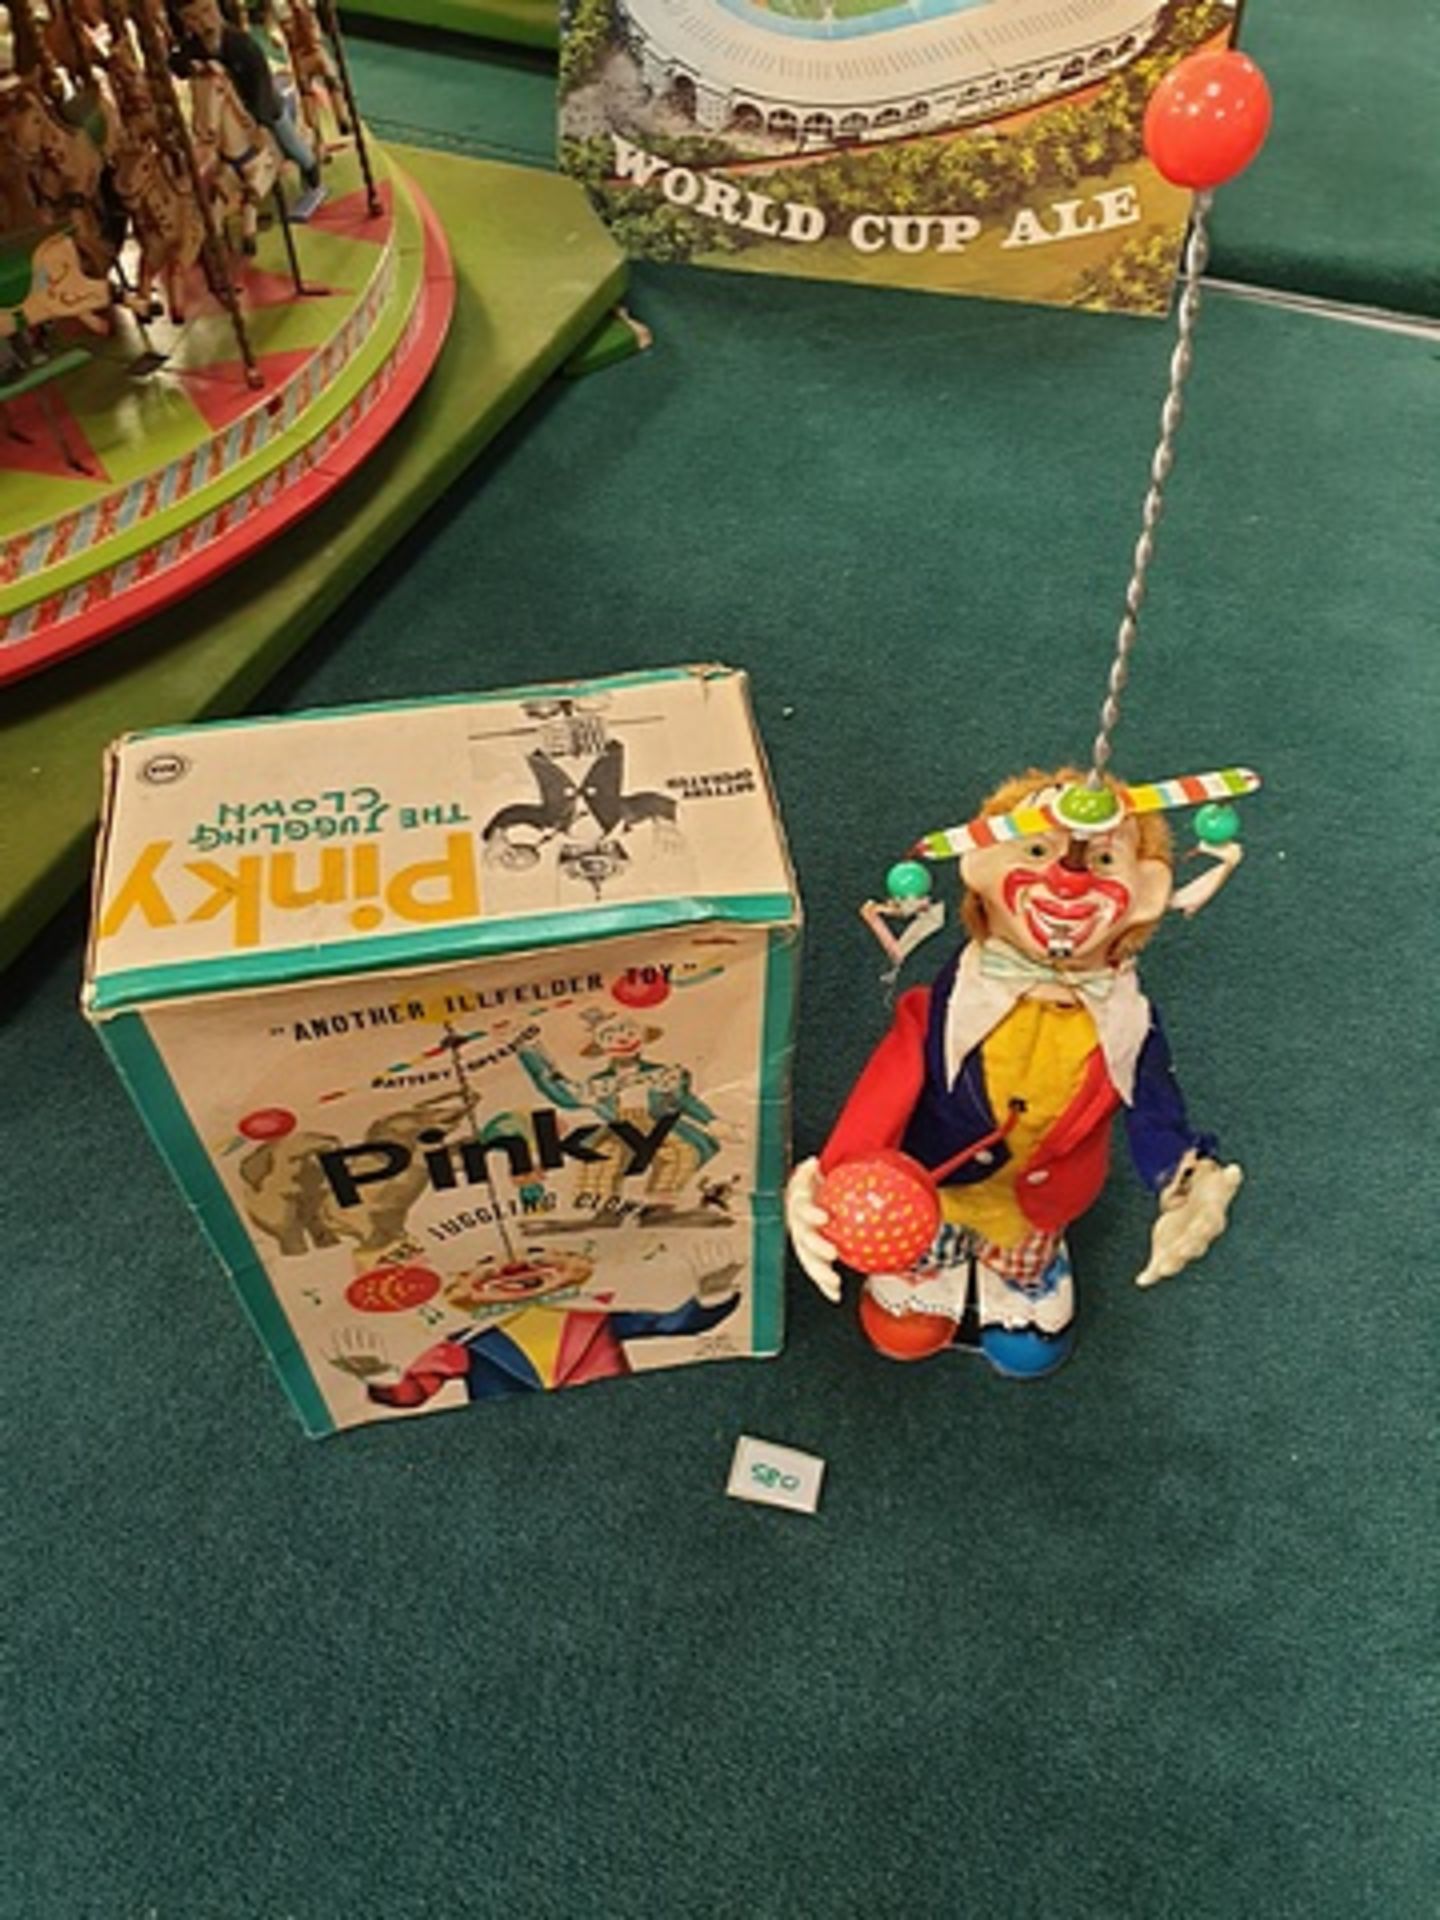 Alps (Japan) Battery Operated Pinky The Juggling Clown With Box